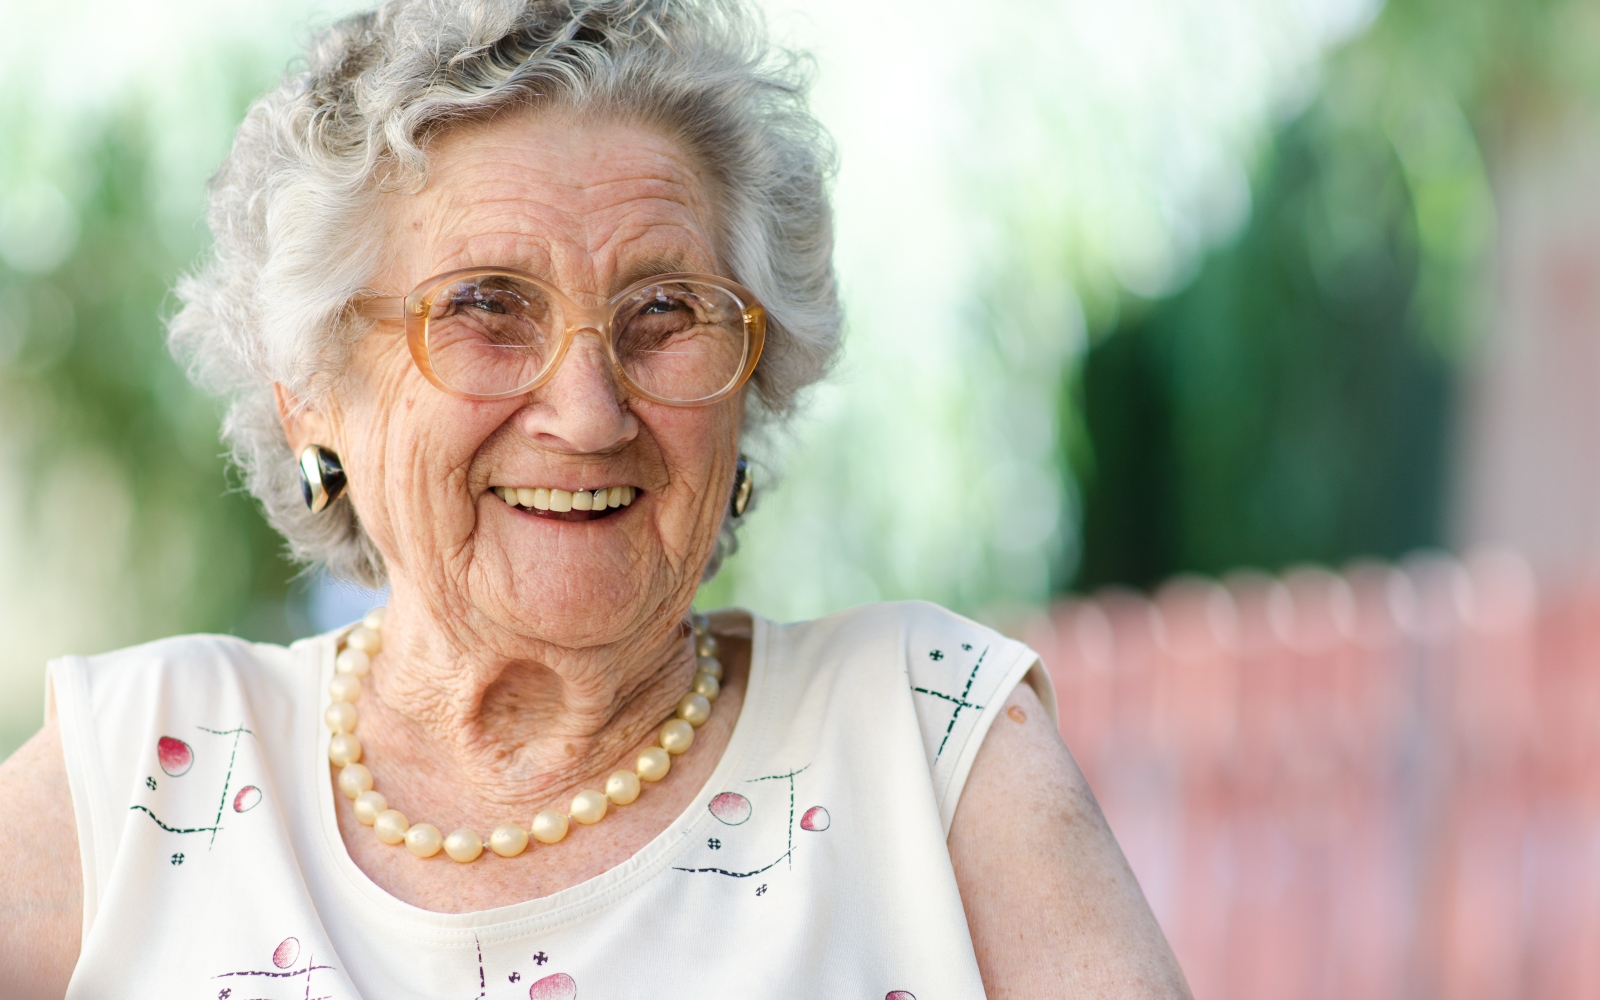 A senior woman smiles with glasses on.